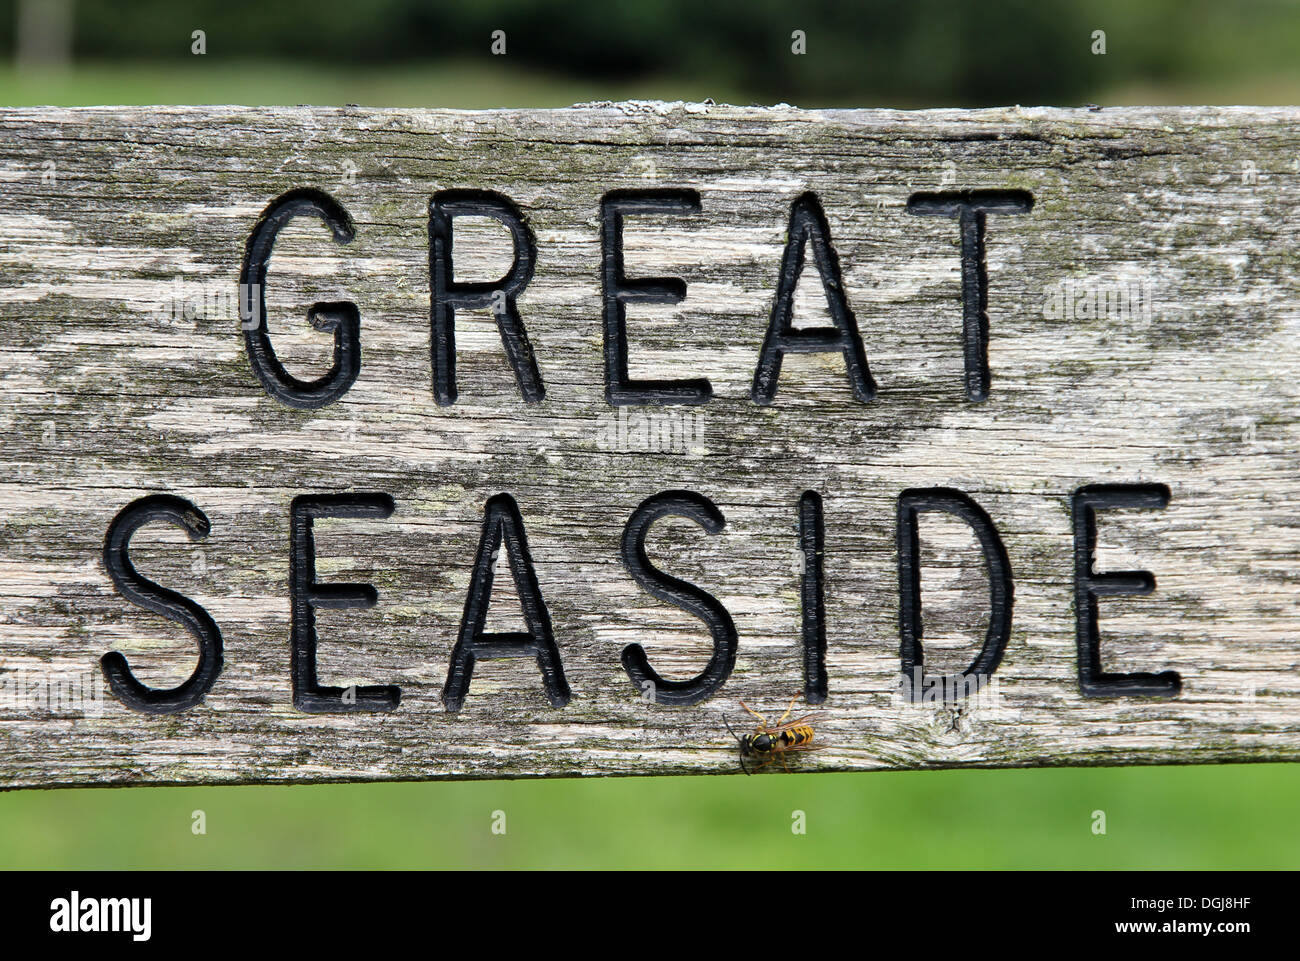 footpath sign to area known as Great Seaside in Branscombe Devon south east England UK Stock Photo